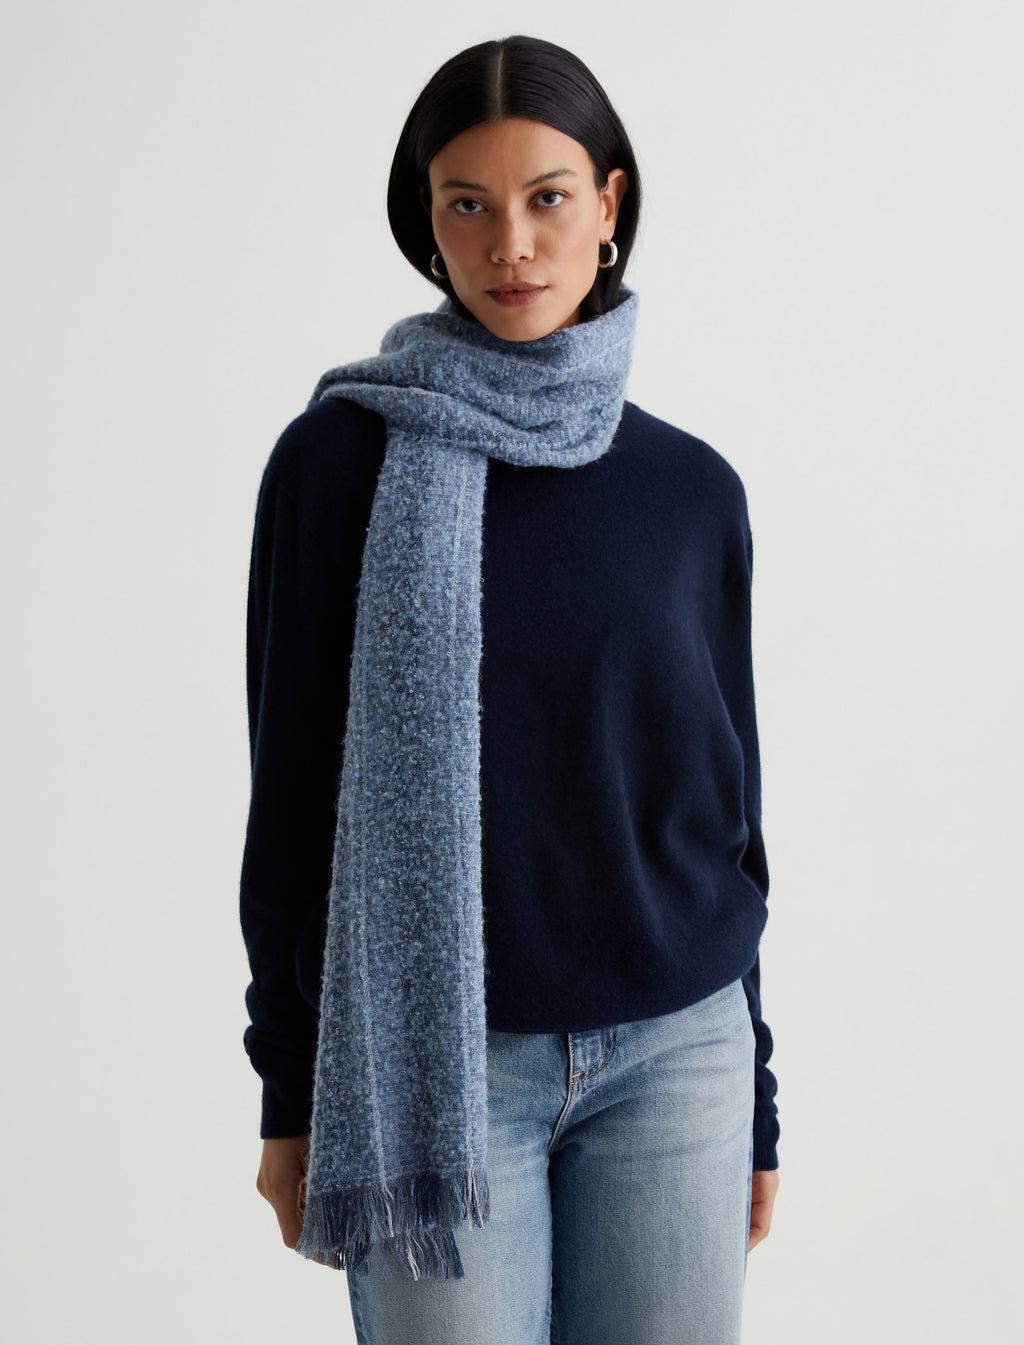 Accessory Arden Scarf Indigo Wool Stripe at AG Jeans Official Store